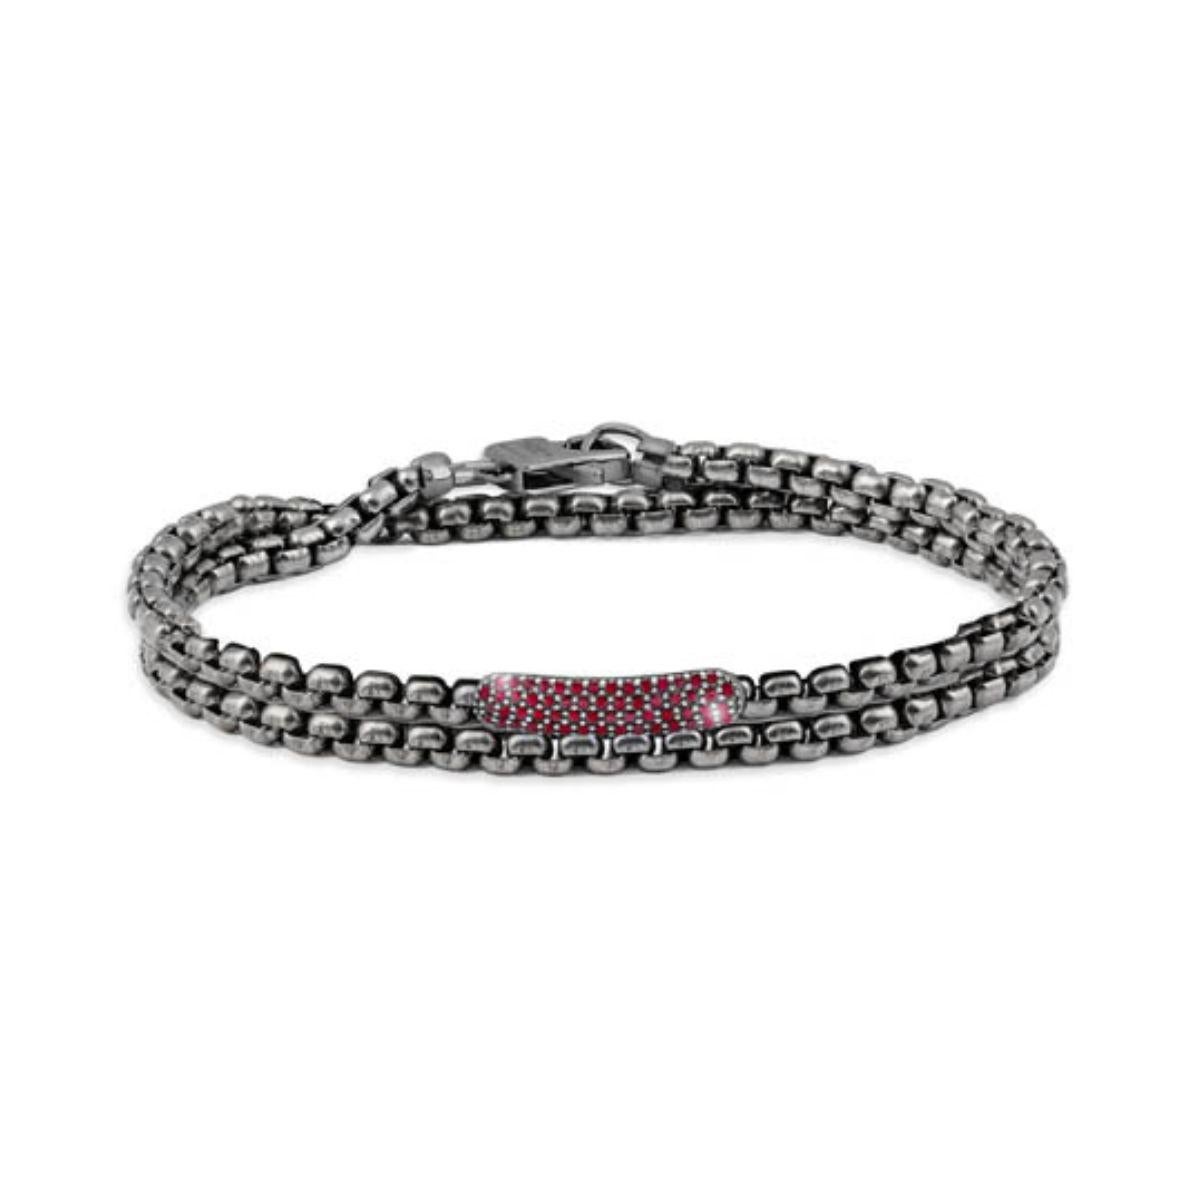 Black Rhodium Plated Sterling Silver Catena Baton Bracelet with Rubies, Size M In New Condition For Sale In Fulham business exchange, London